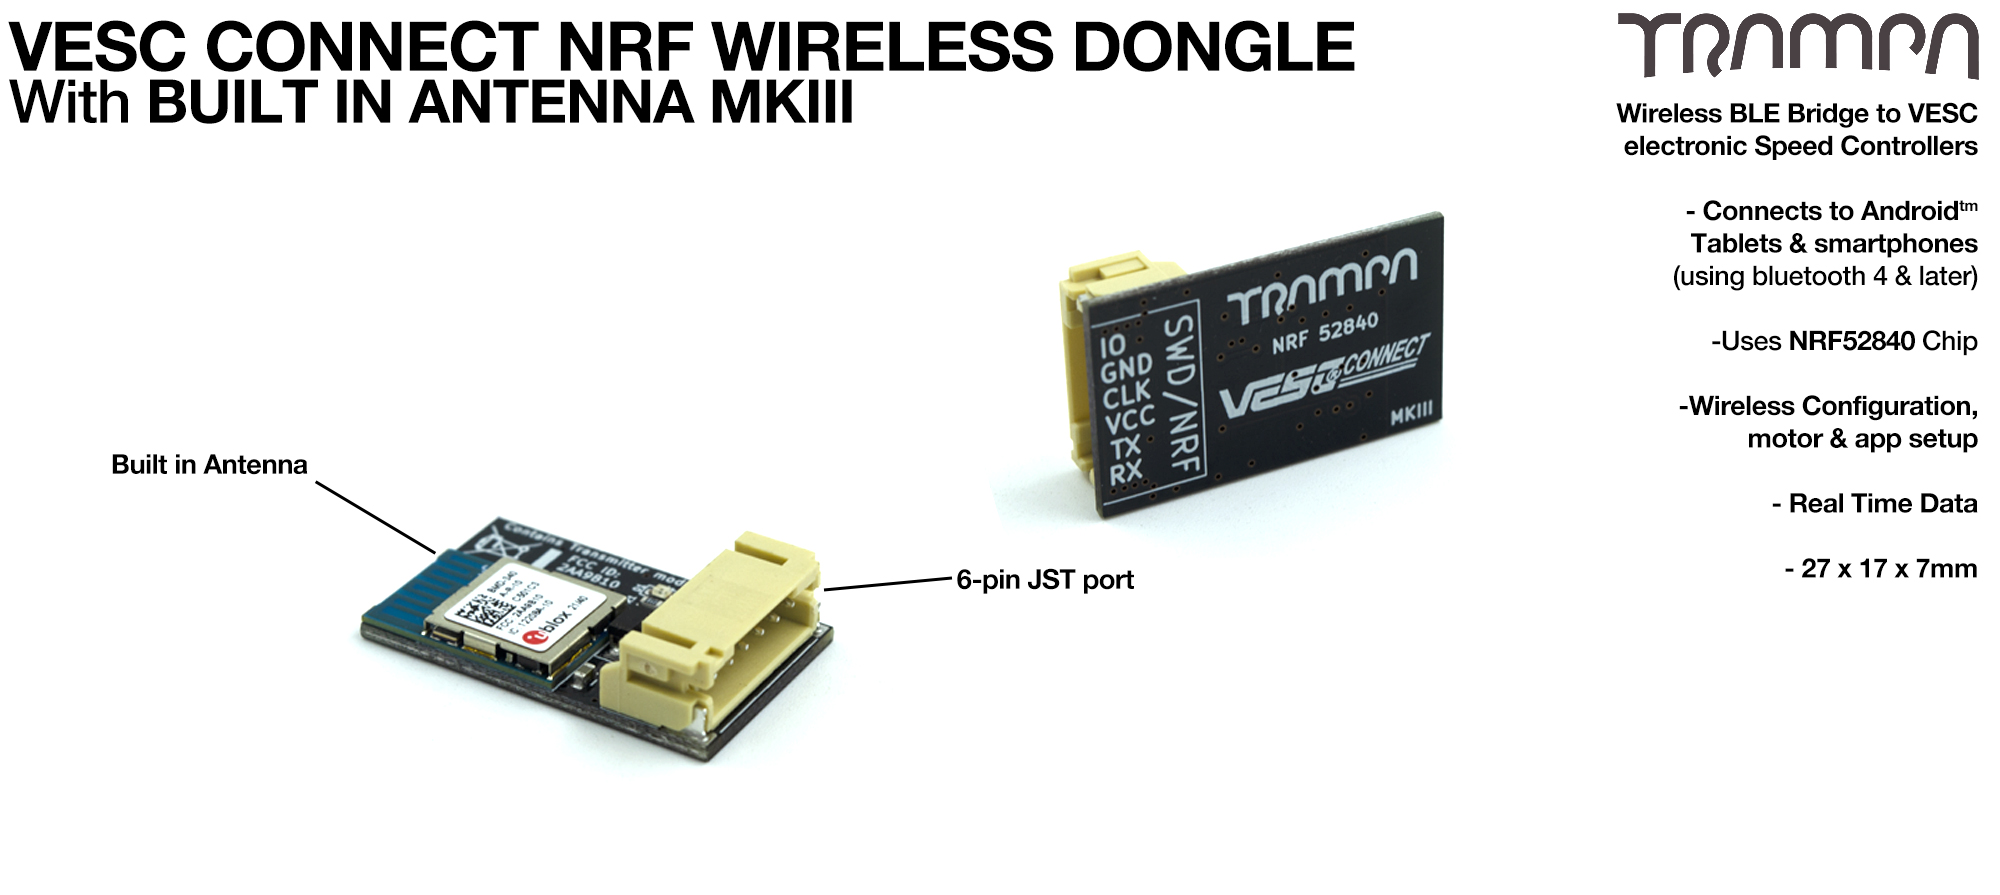 VESC Connect NRF Wireless Dongle with INTERNAL Antenna 